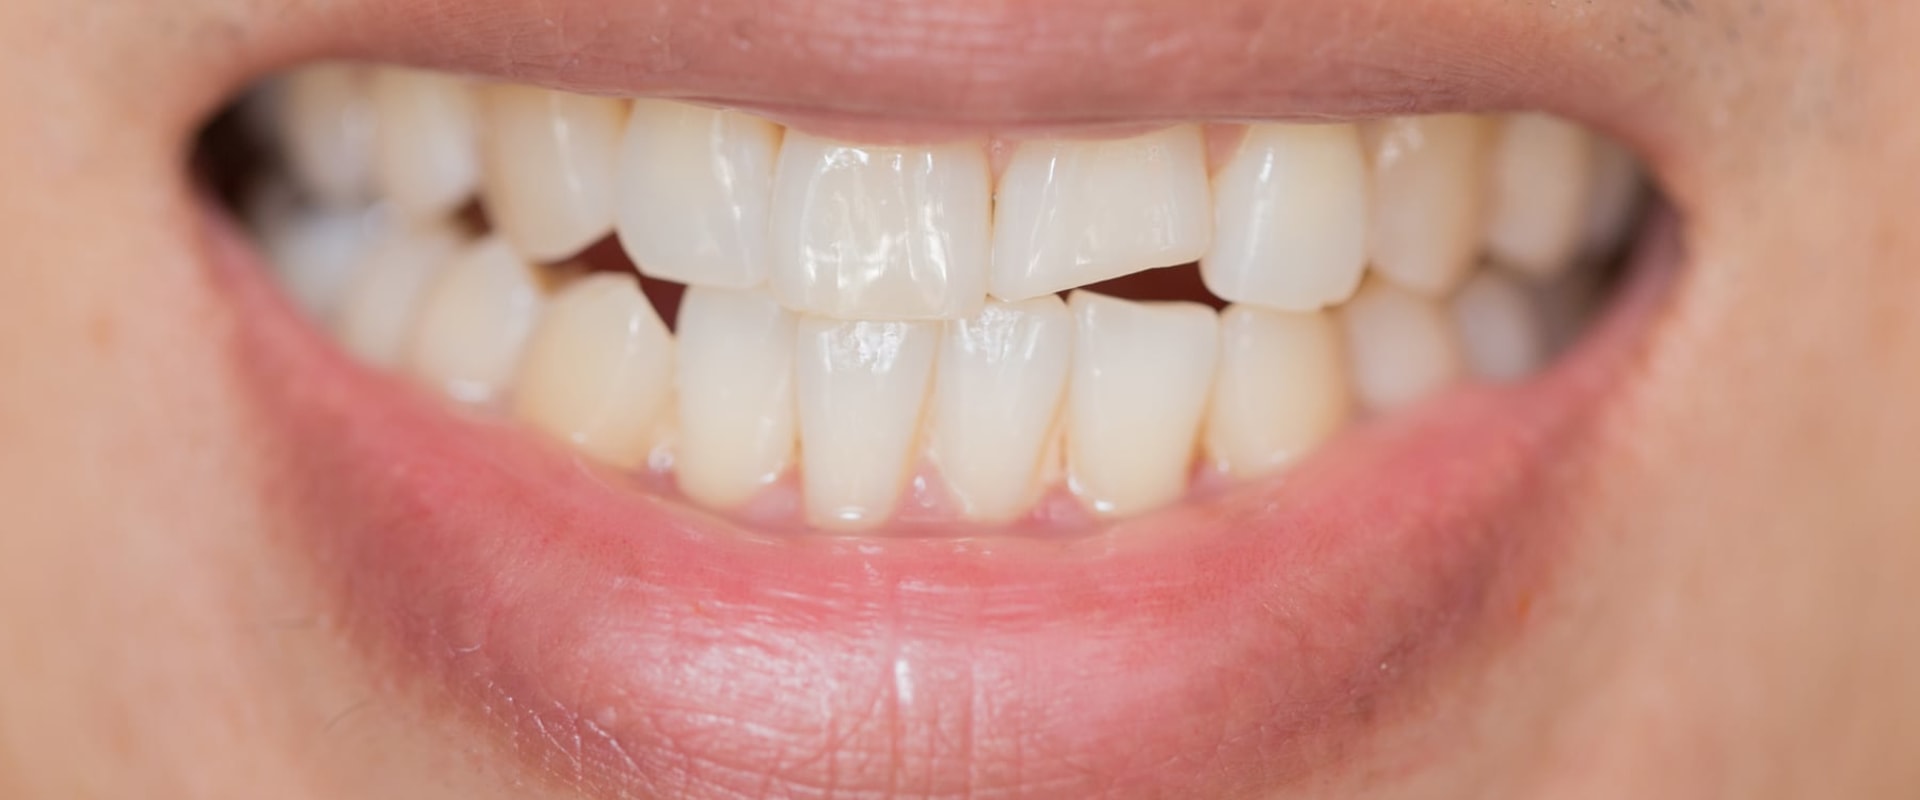 How to Fix a Chipped Front Tooth Permanently